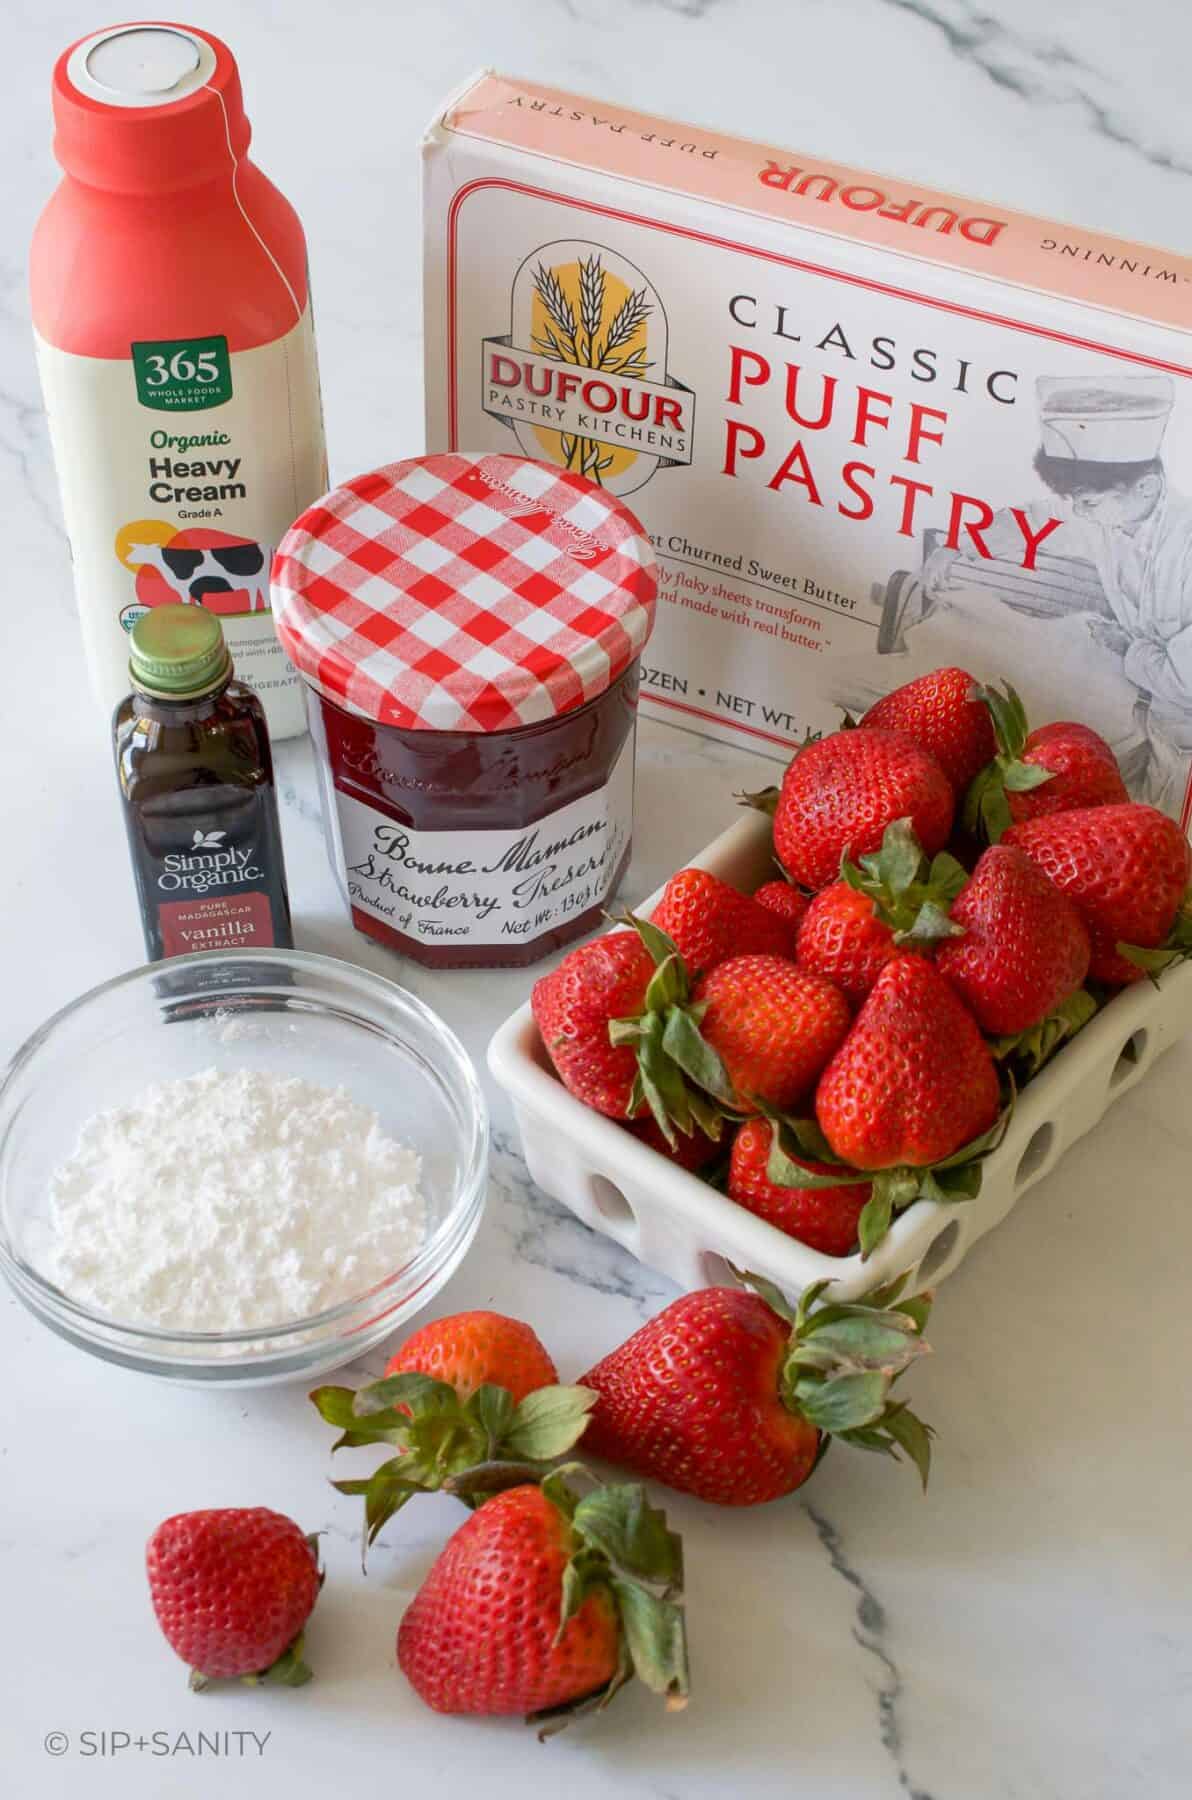 Raw ingredients for giant strawberry shortcake dessert with puff pastry.